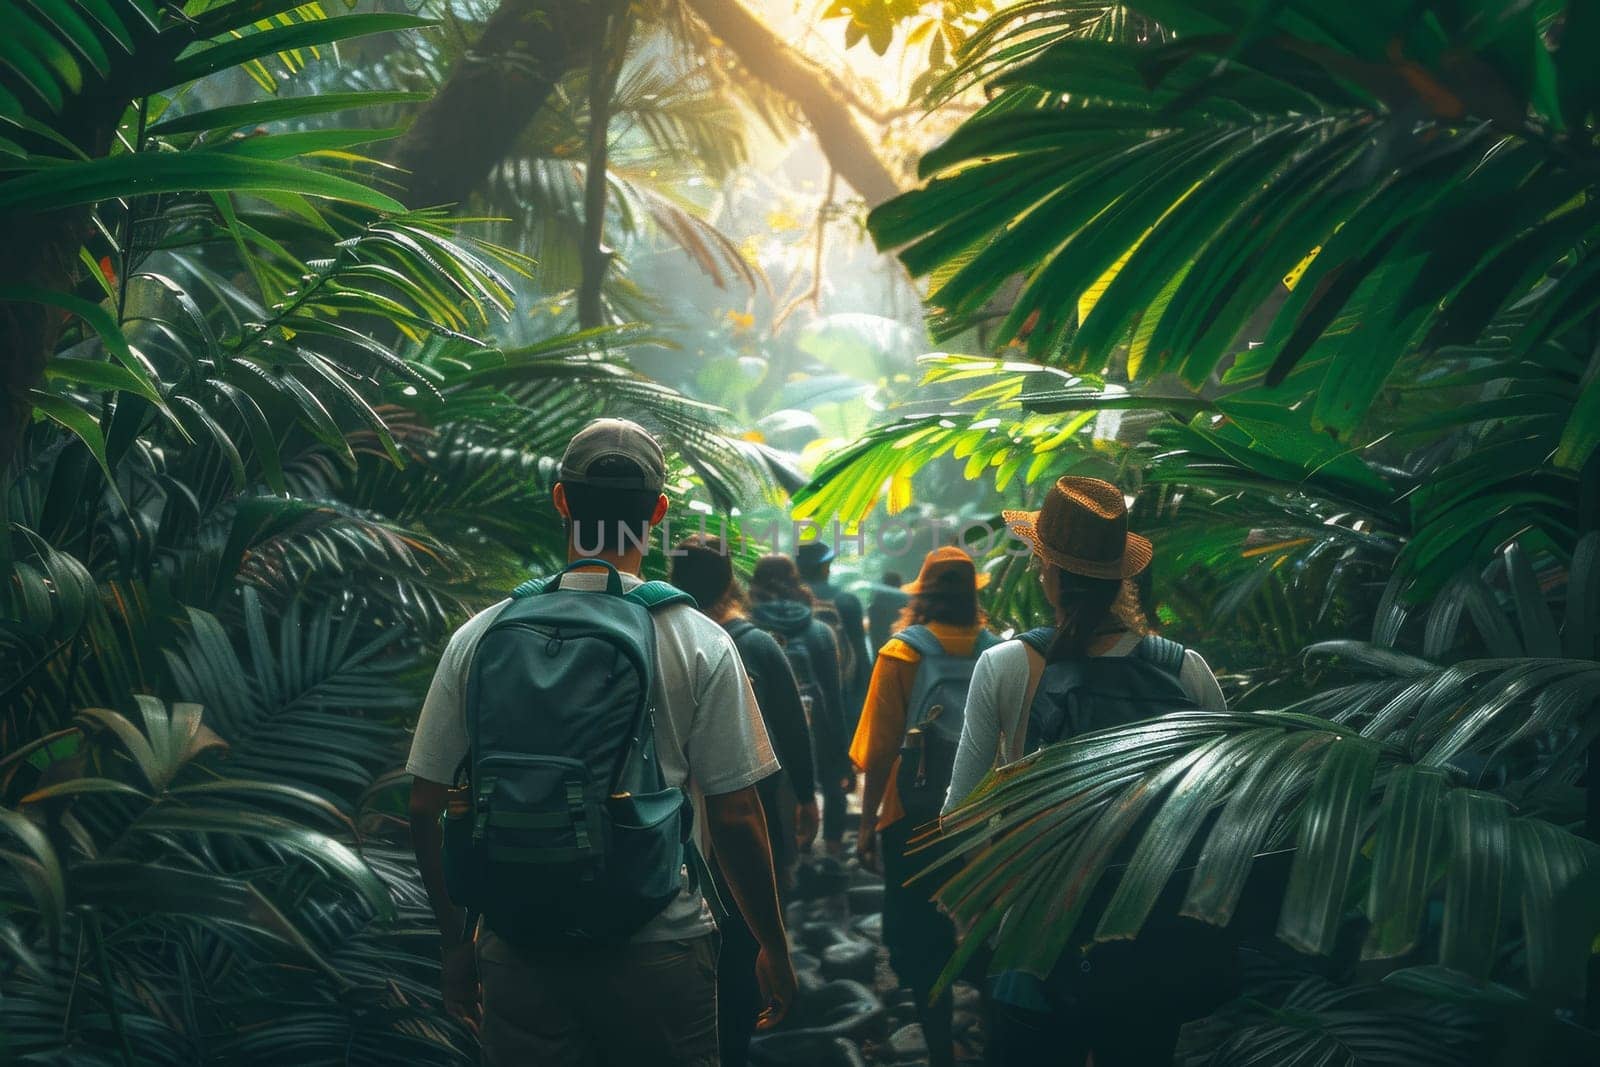 A group of people are hiking through a forest, with some of them wearing backpacks. Scene is adventurous and exciting, as the group is exploring the wilderness together